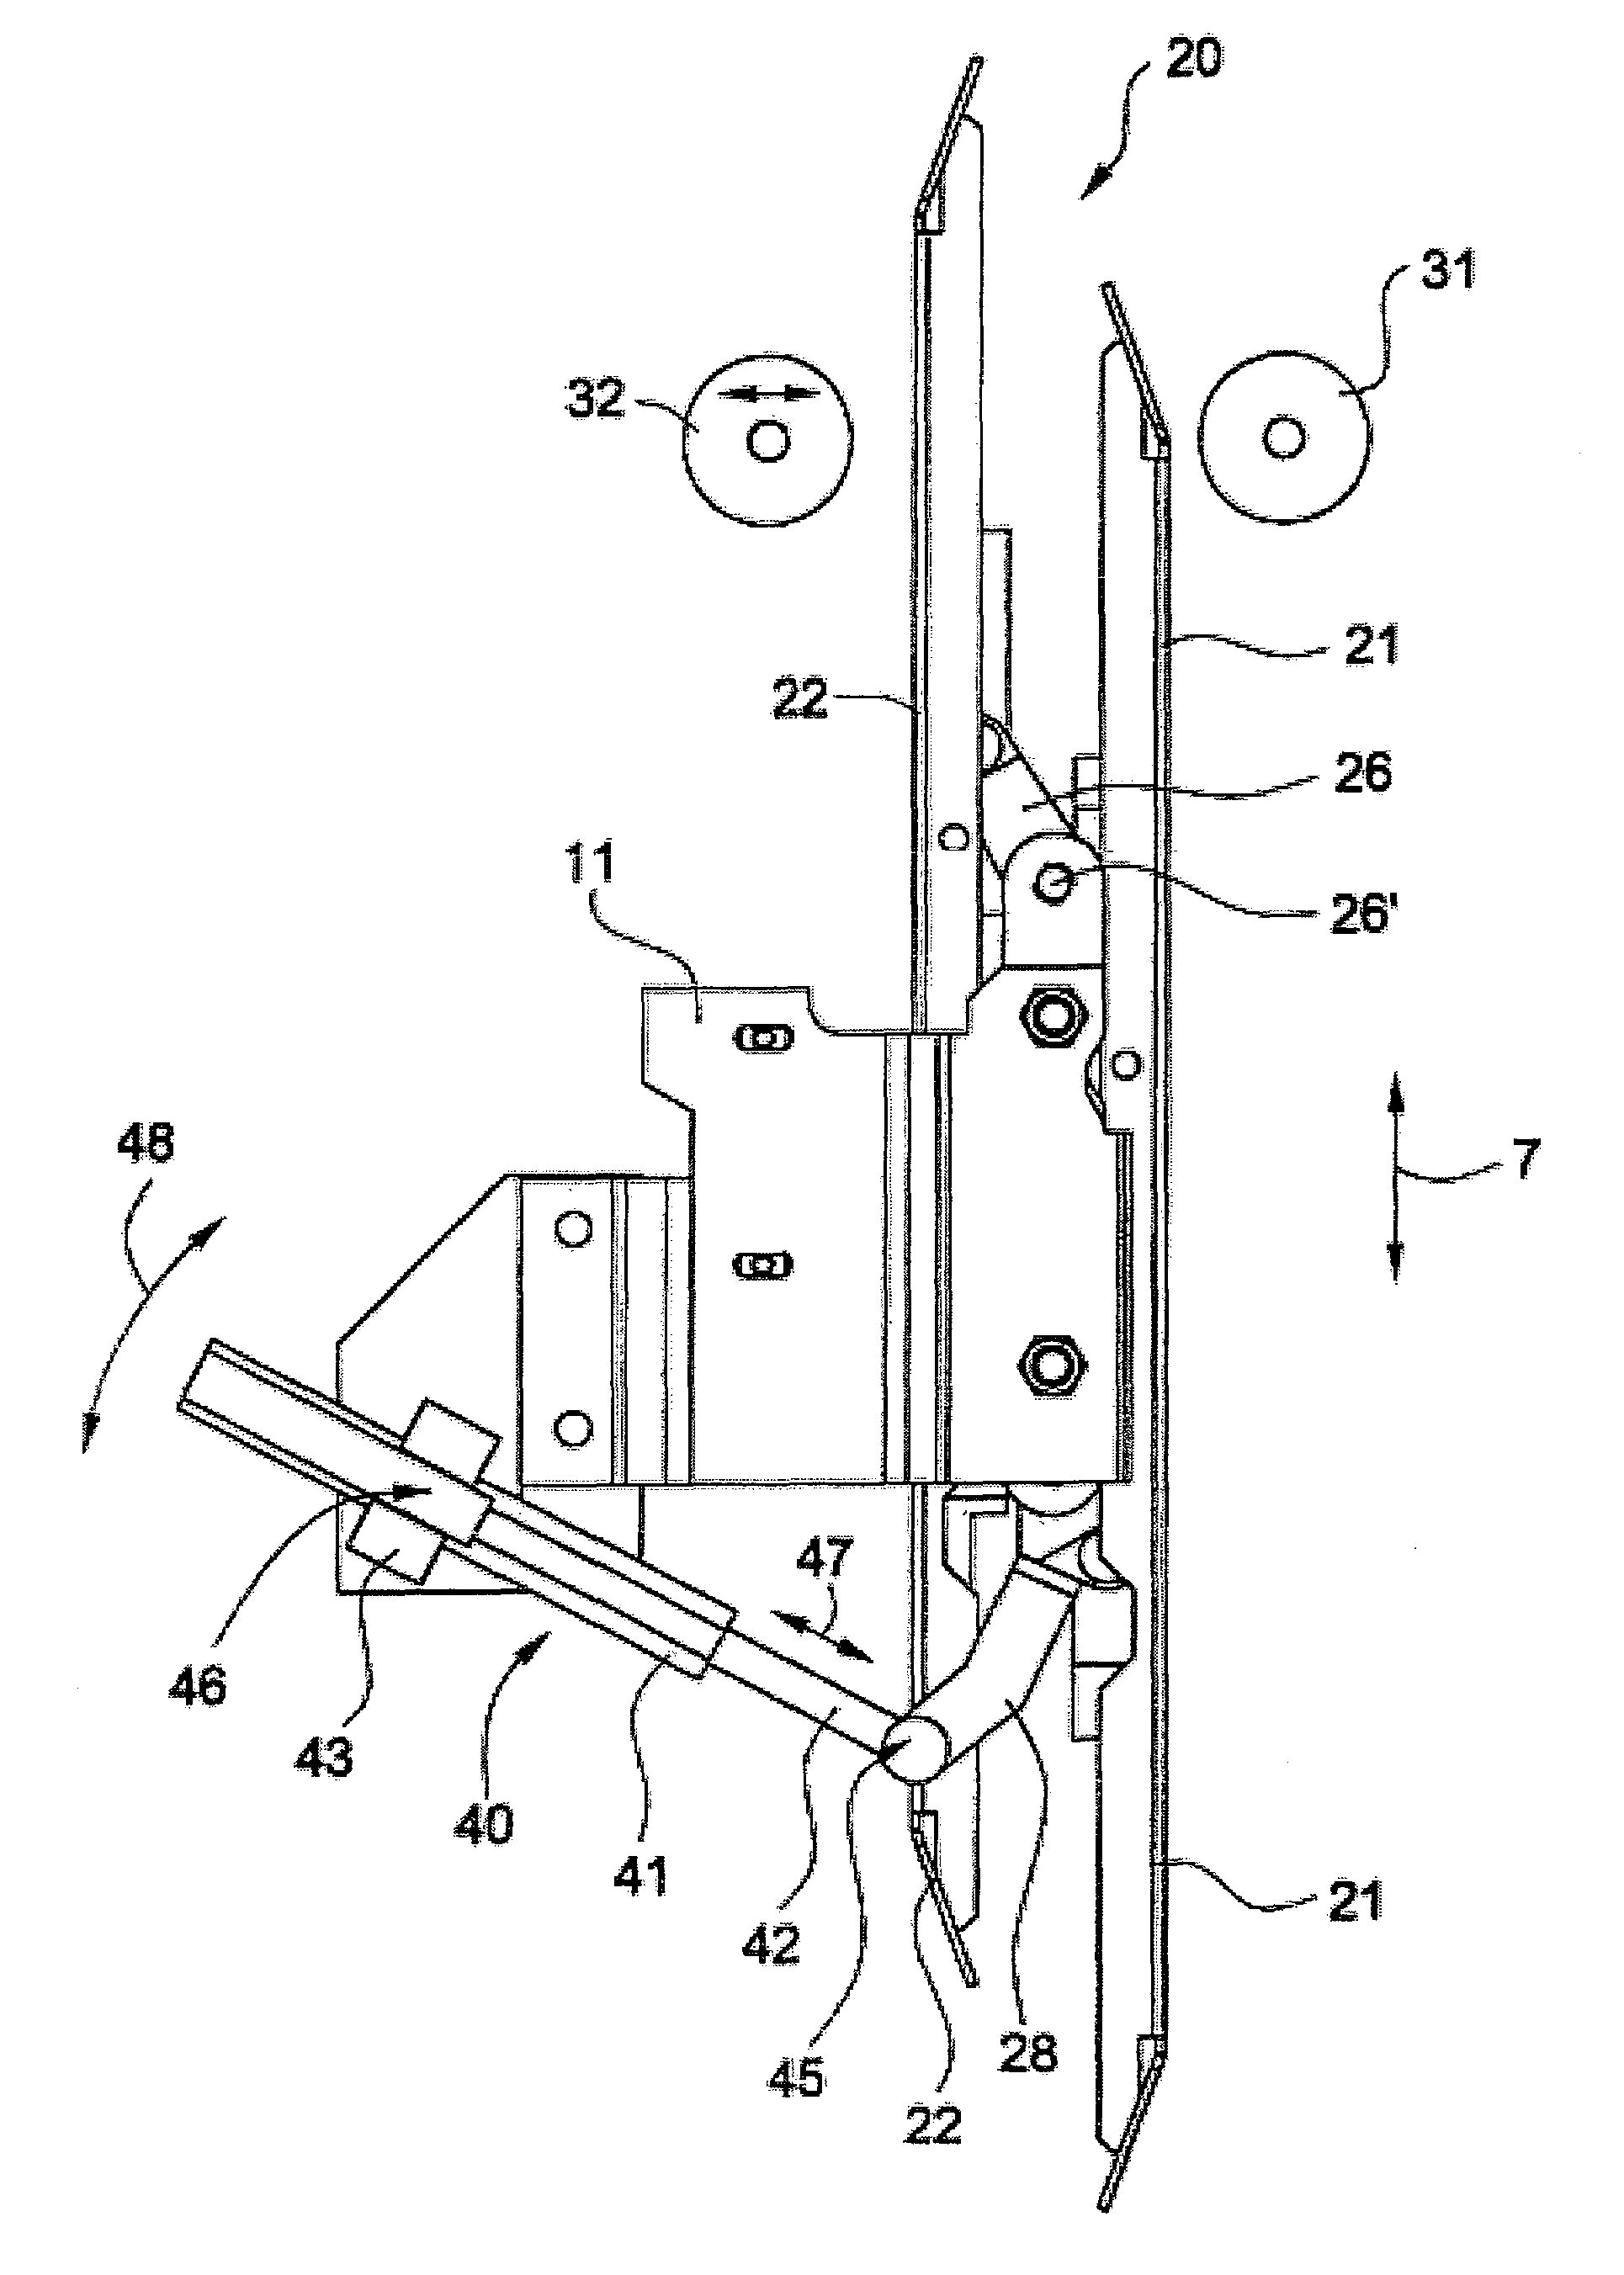 Clutch for coupling a car door of an elevator car with a landing door of an elevator system